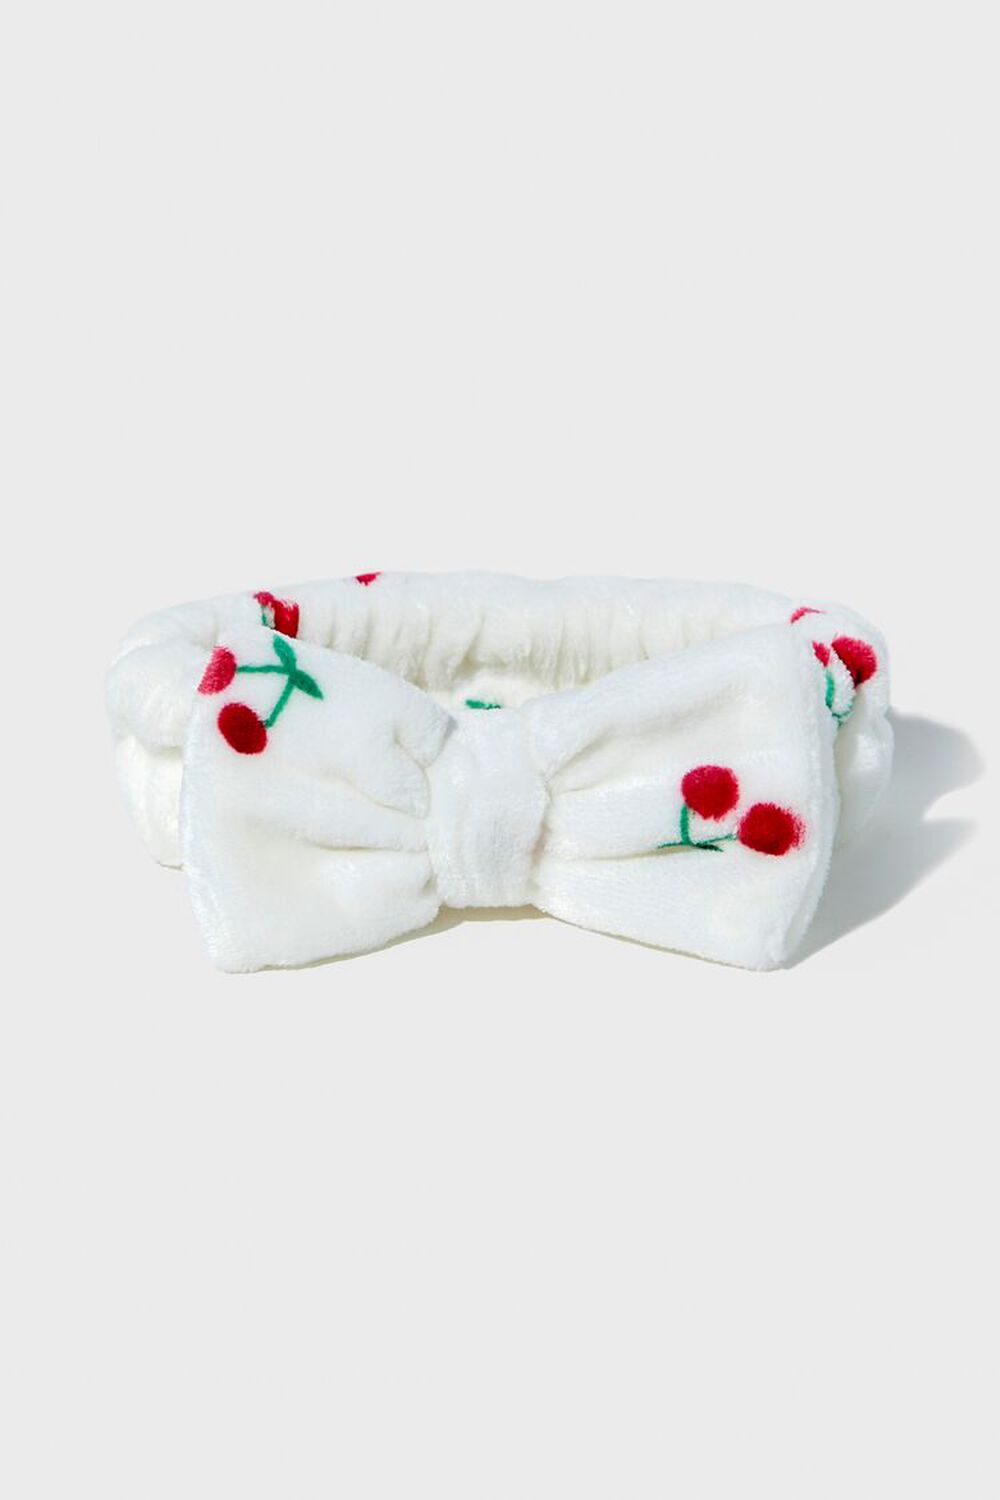 WHITE/RED Cherry Print Bow Headwrap, image 1